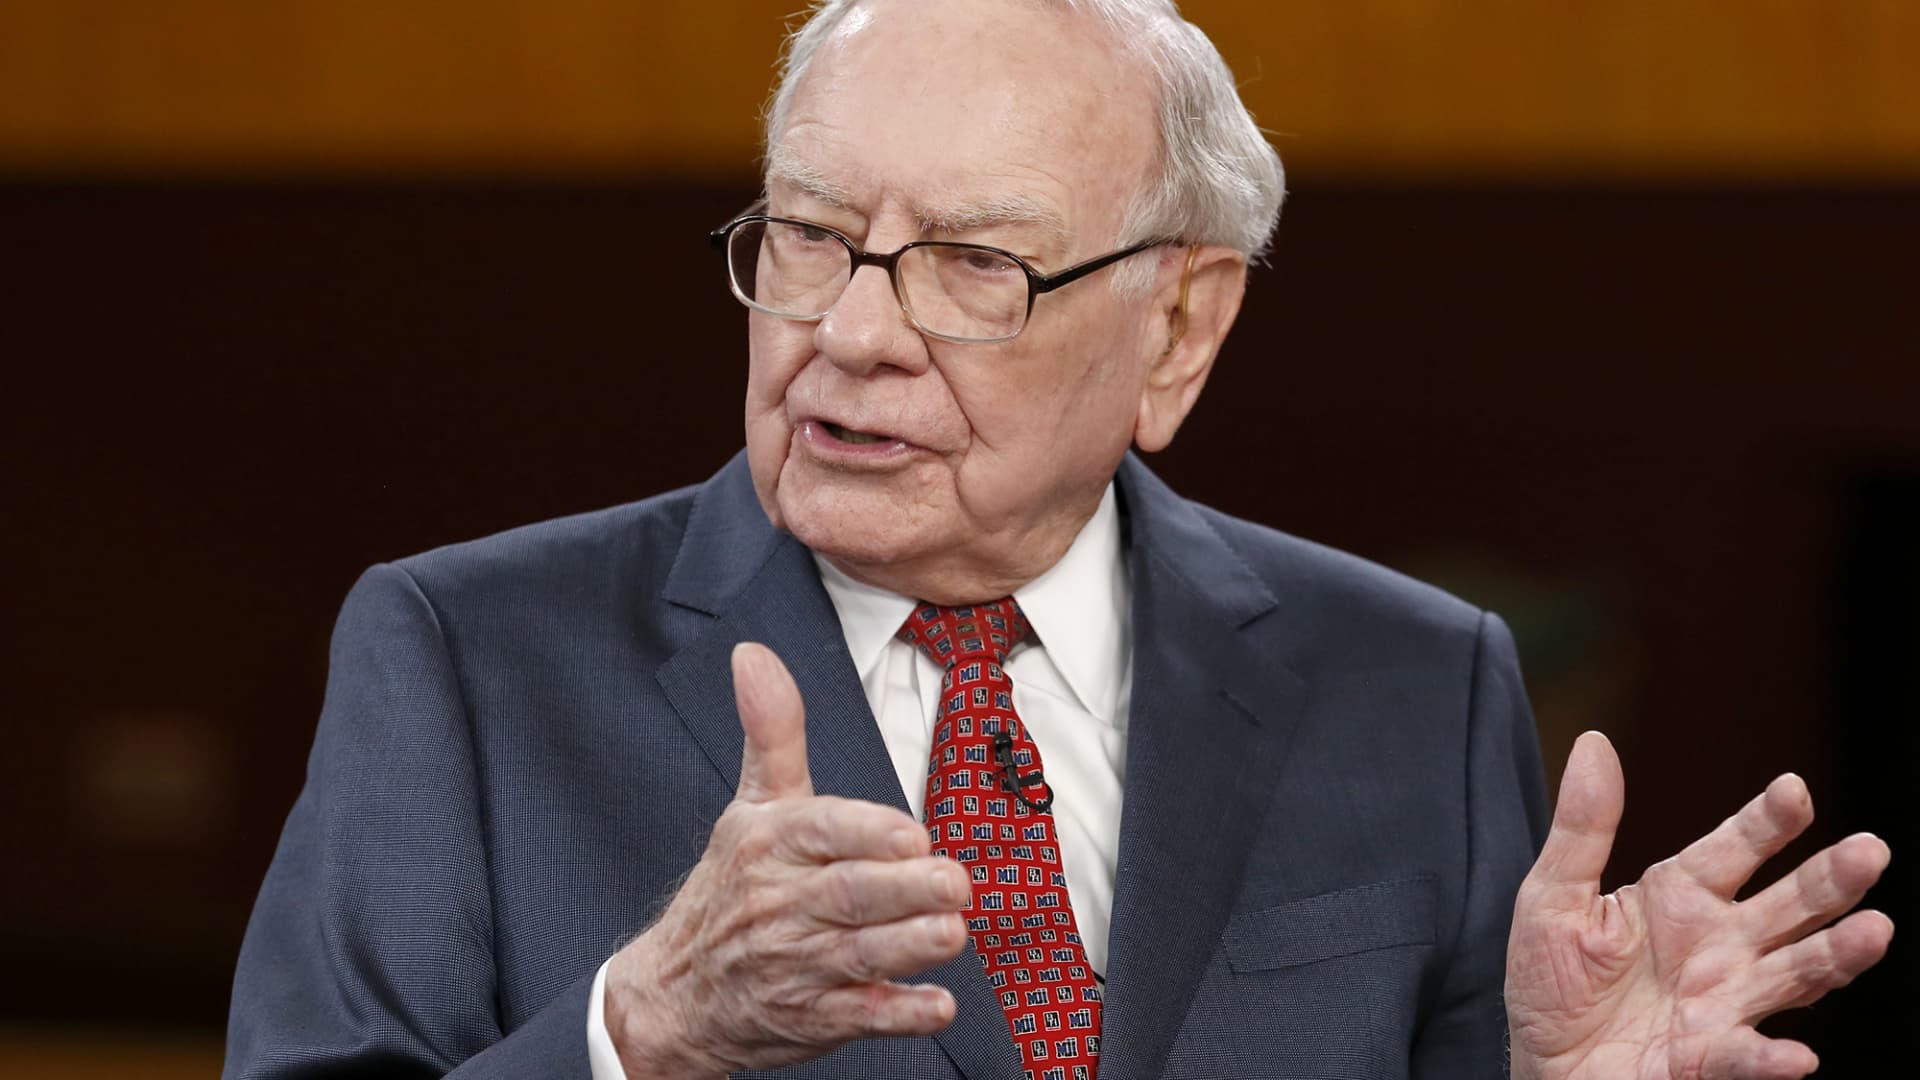 Warren Buffett: If you invest this way, 'you can't miss'